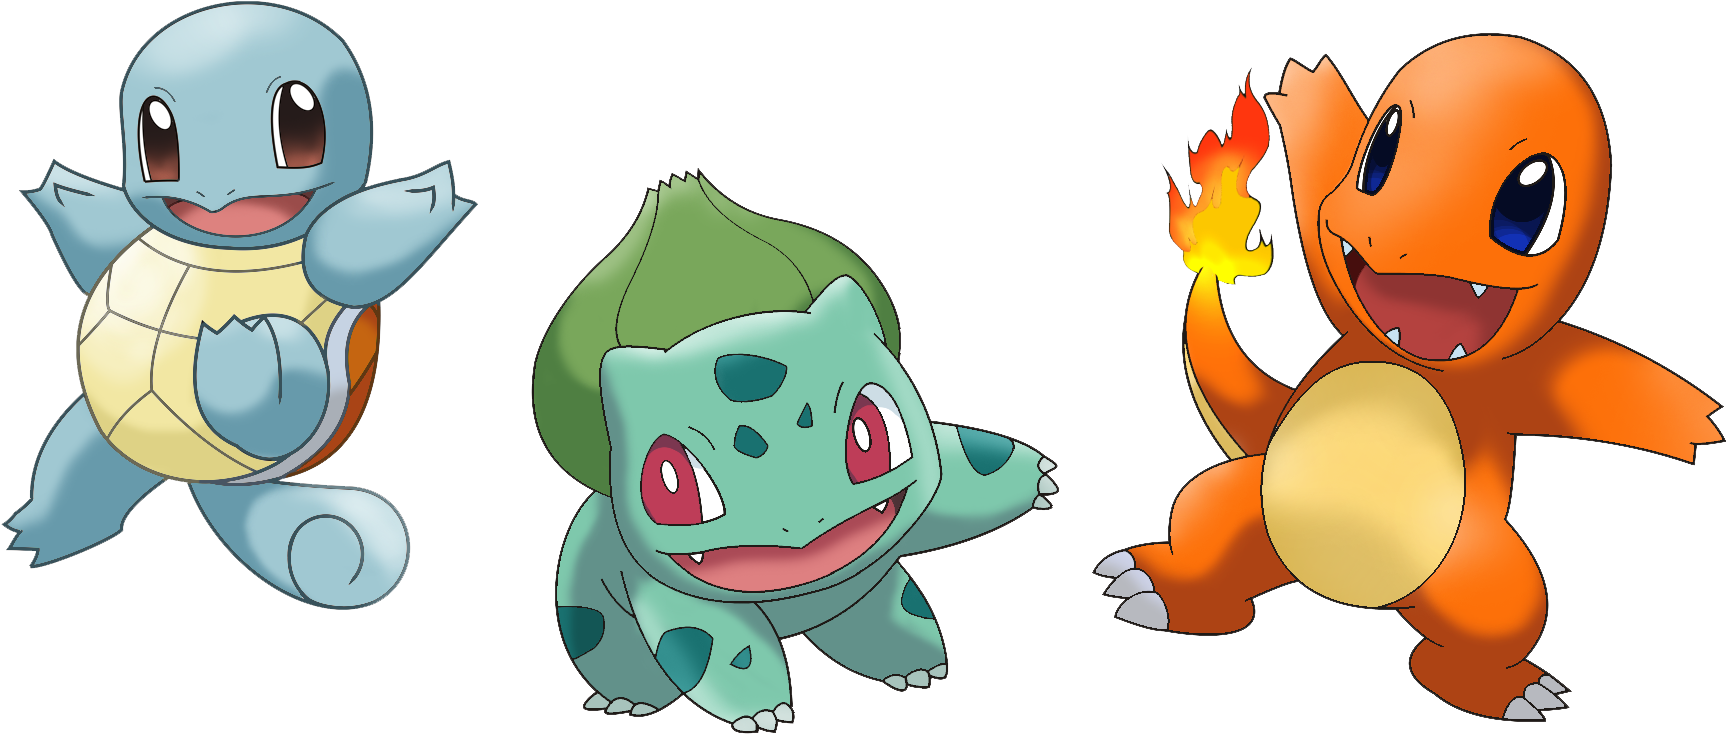 Download Source Starter Pokemon Png Image With No Background